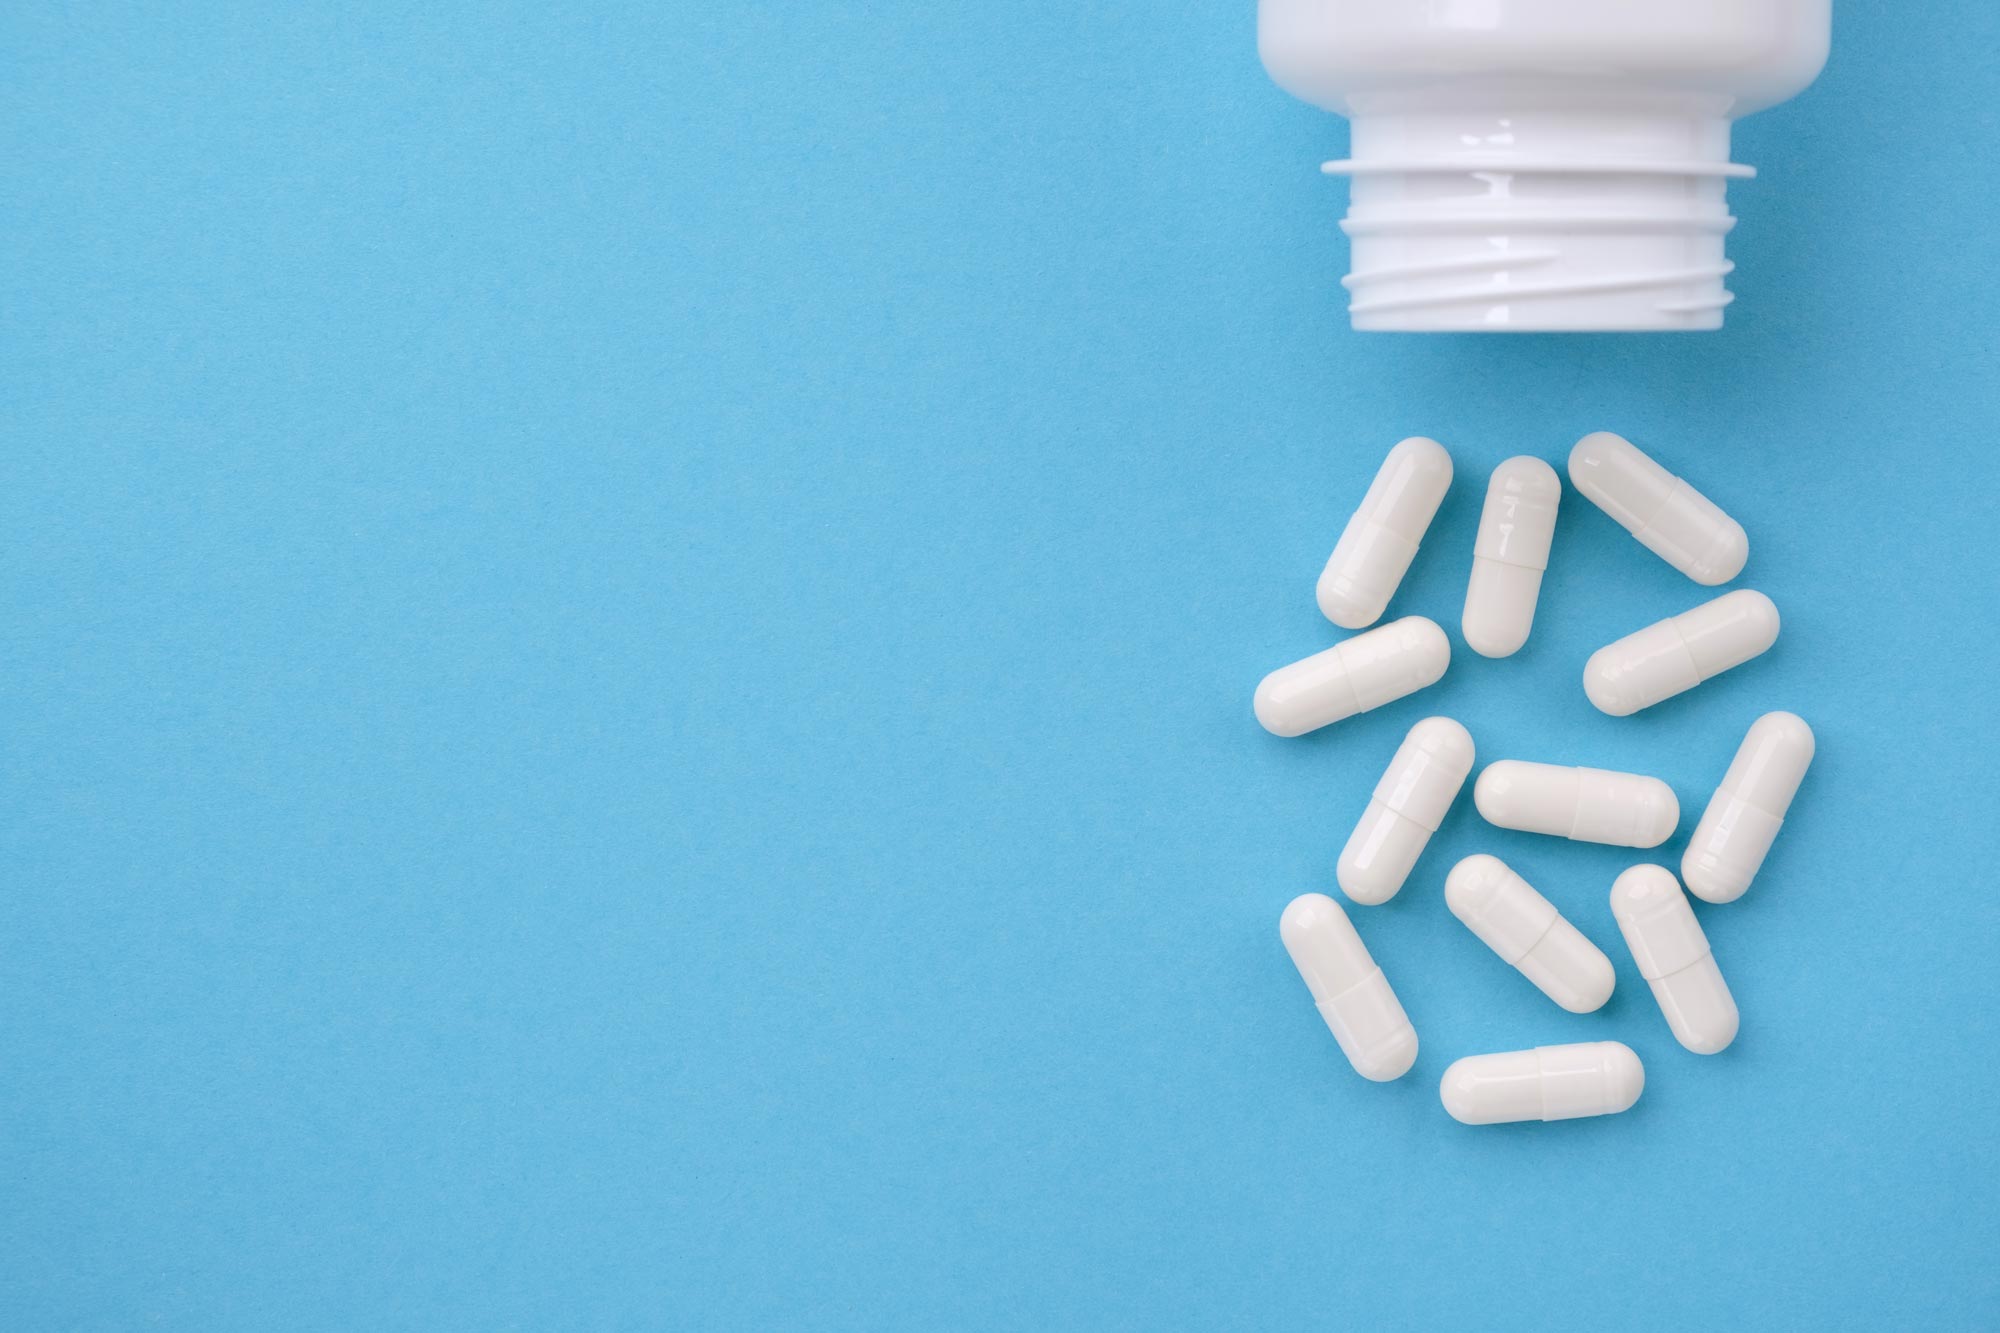 White pills dumped out of a bottle onto a light blue background